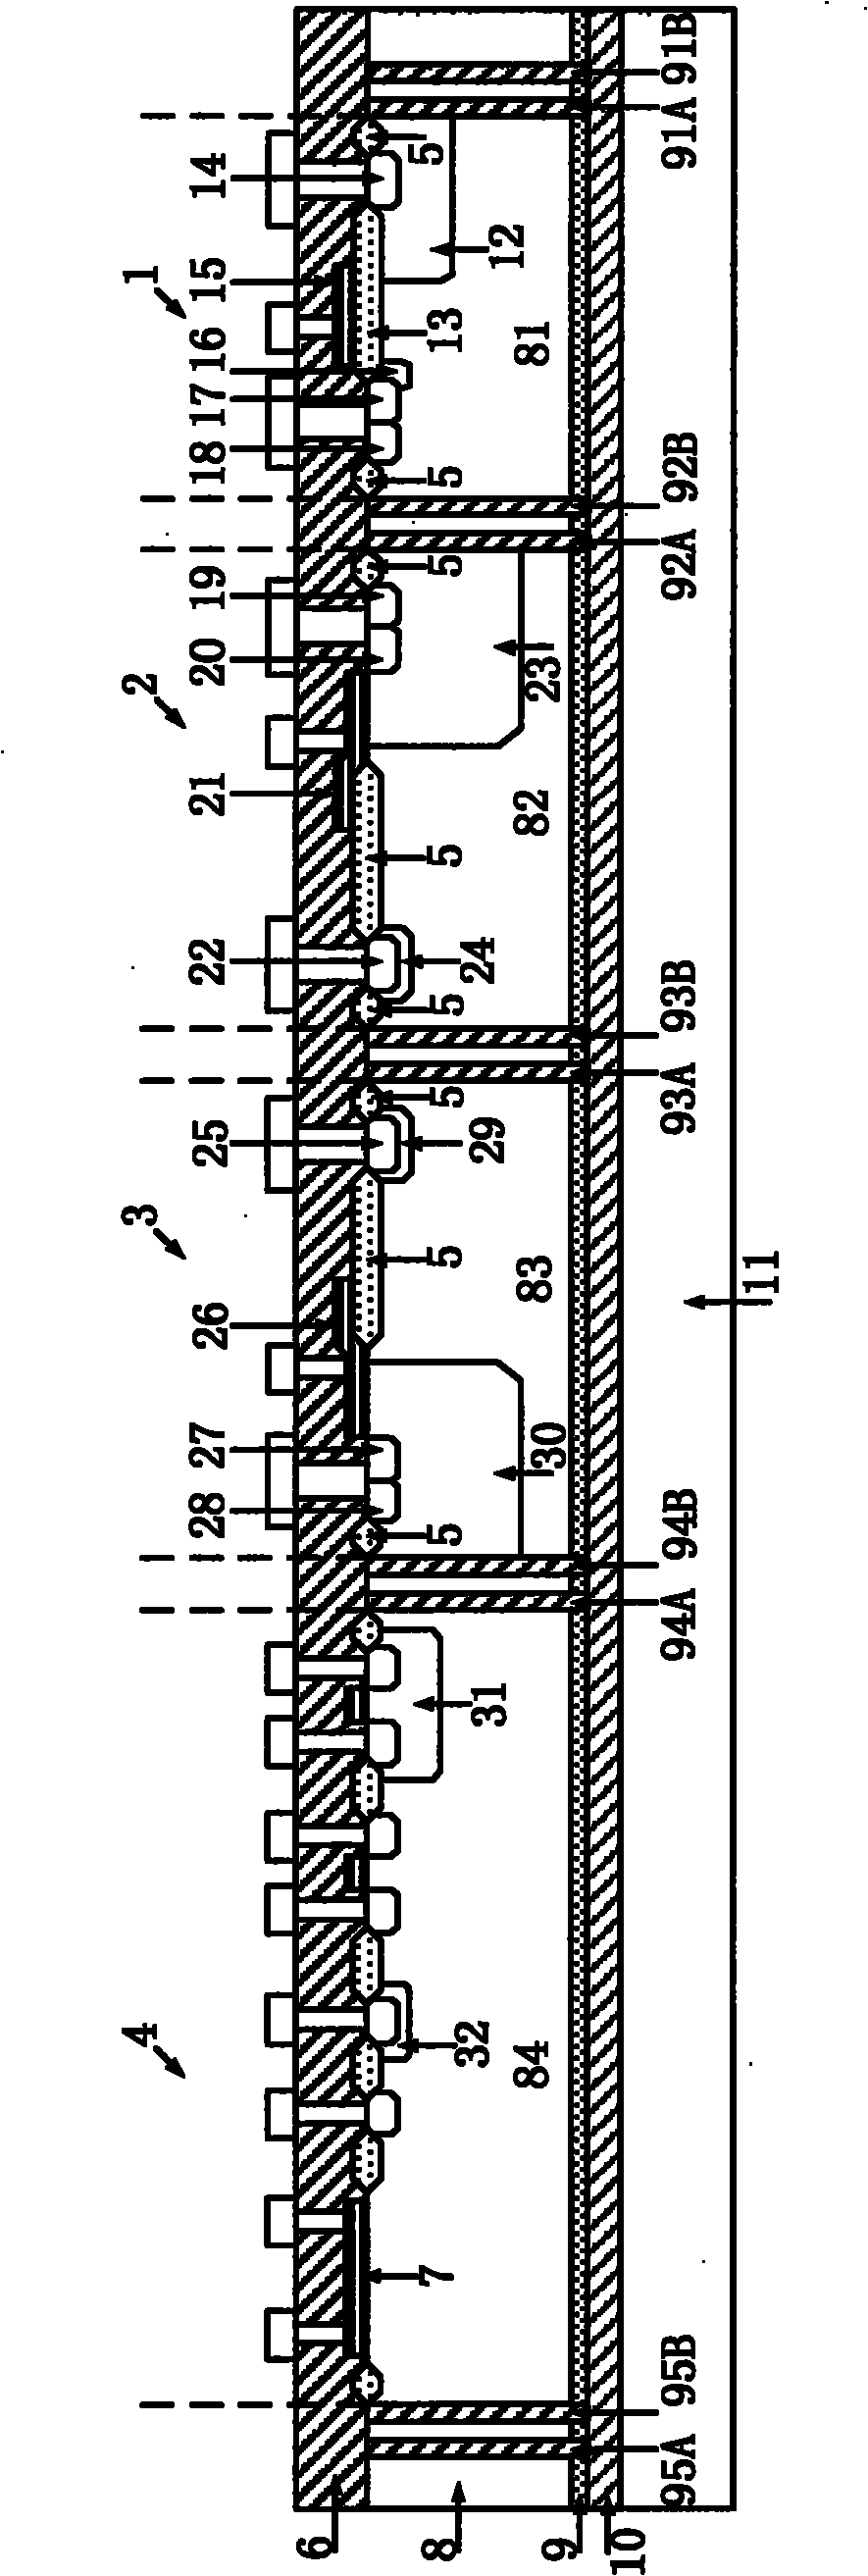 Panel display driving chip based on silicon on insulator (SOI) and preparation method thereof